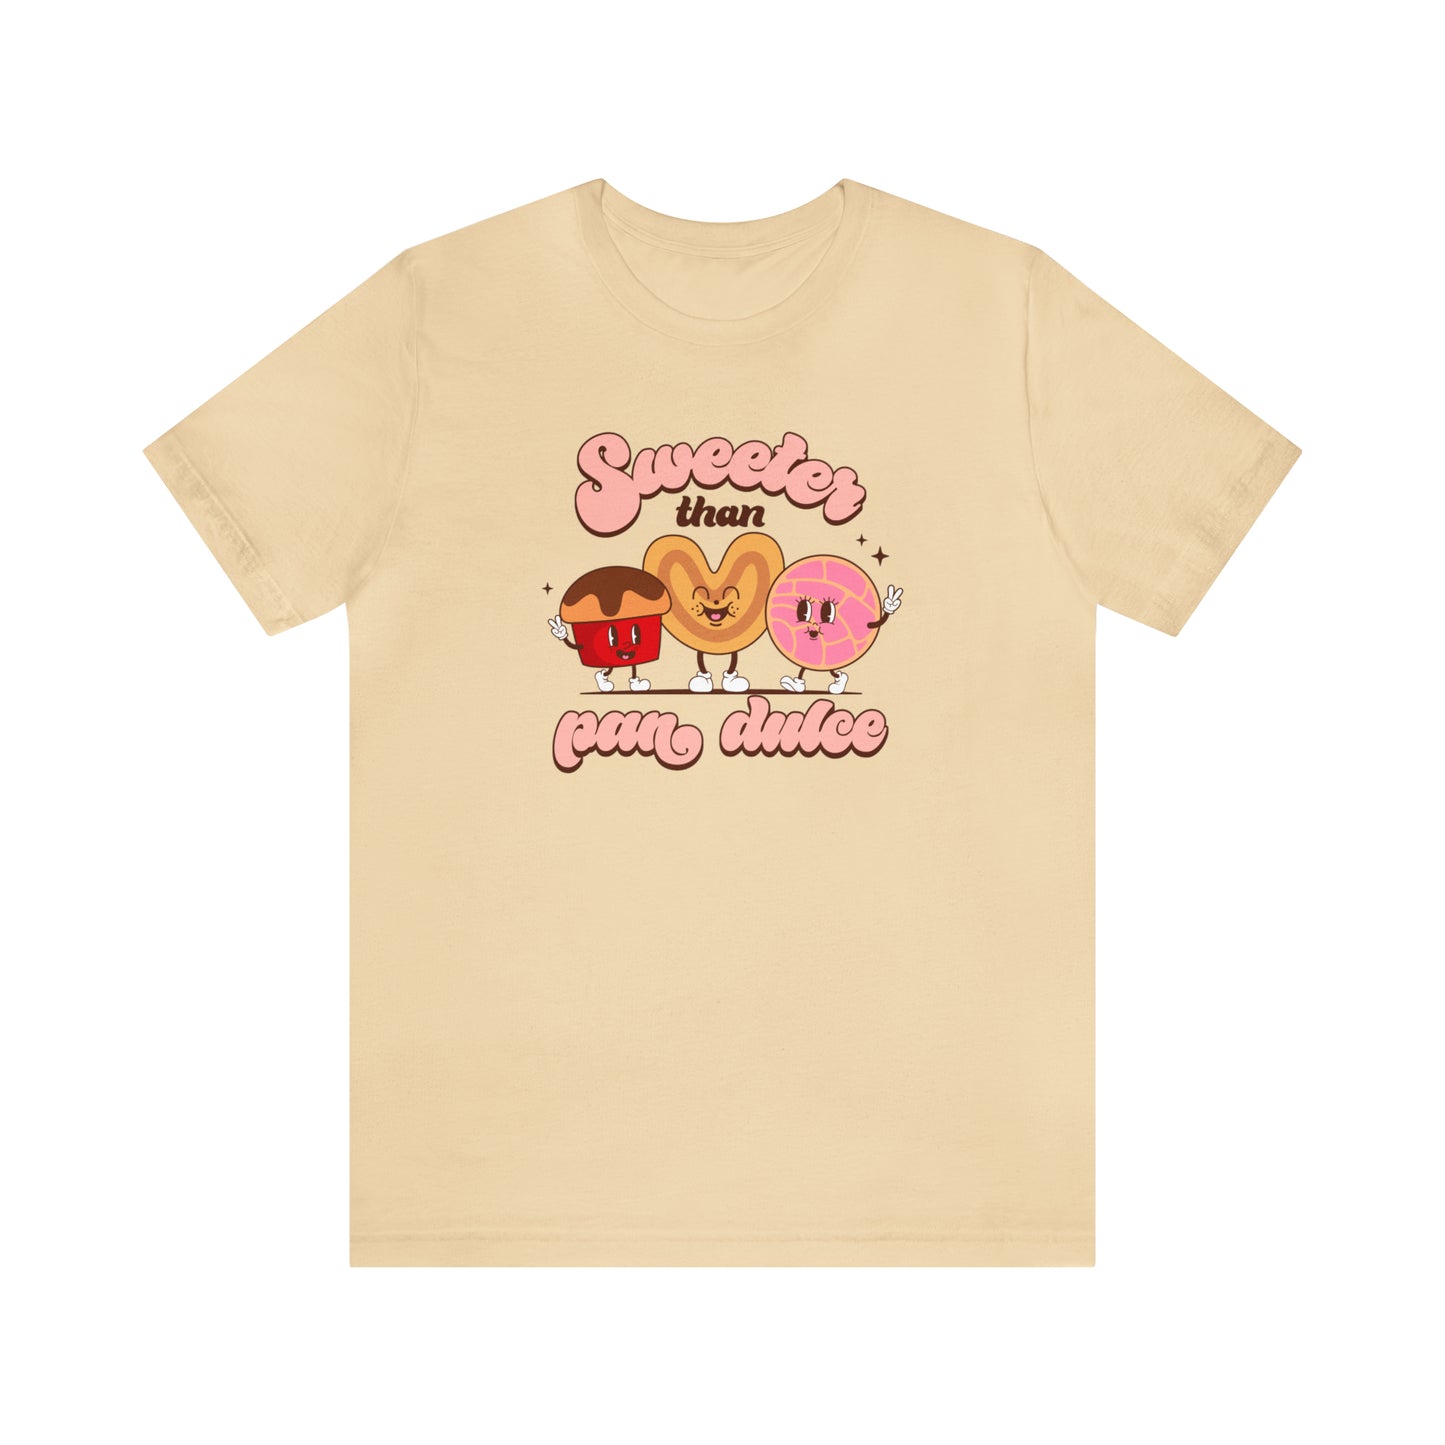 Sweeter than pan dulce shirt for Latin friend or Mexican family.